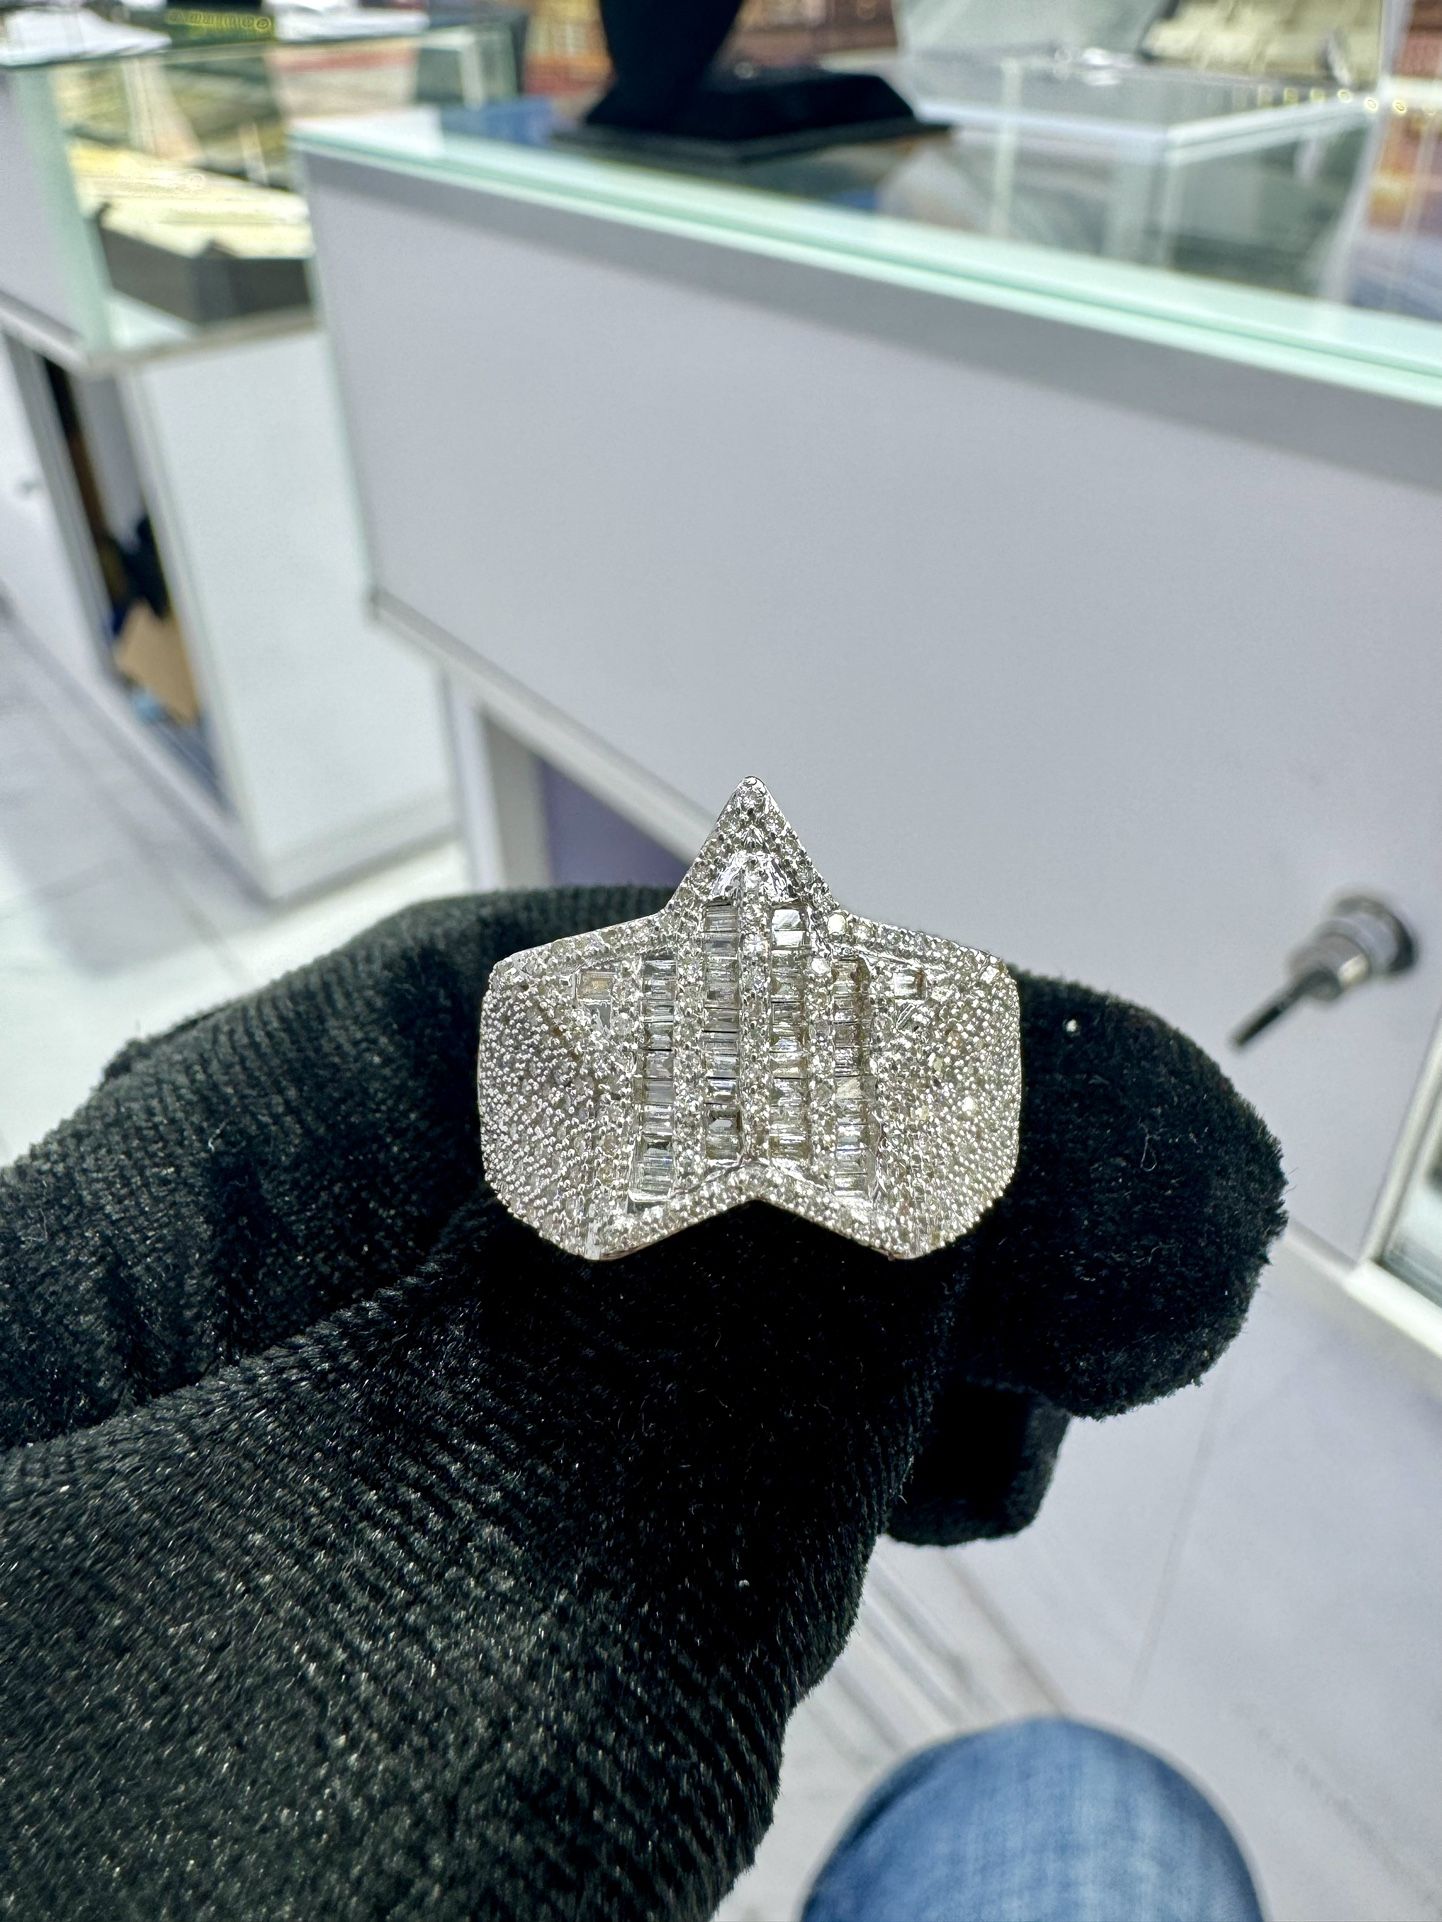 Star Ring Real Gold Real Diamonds $1100